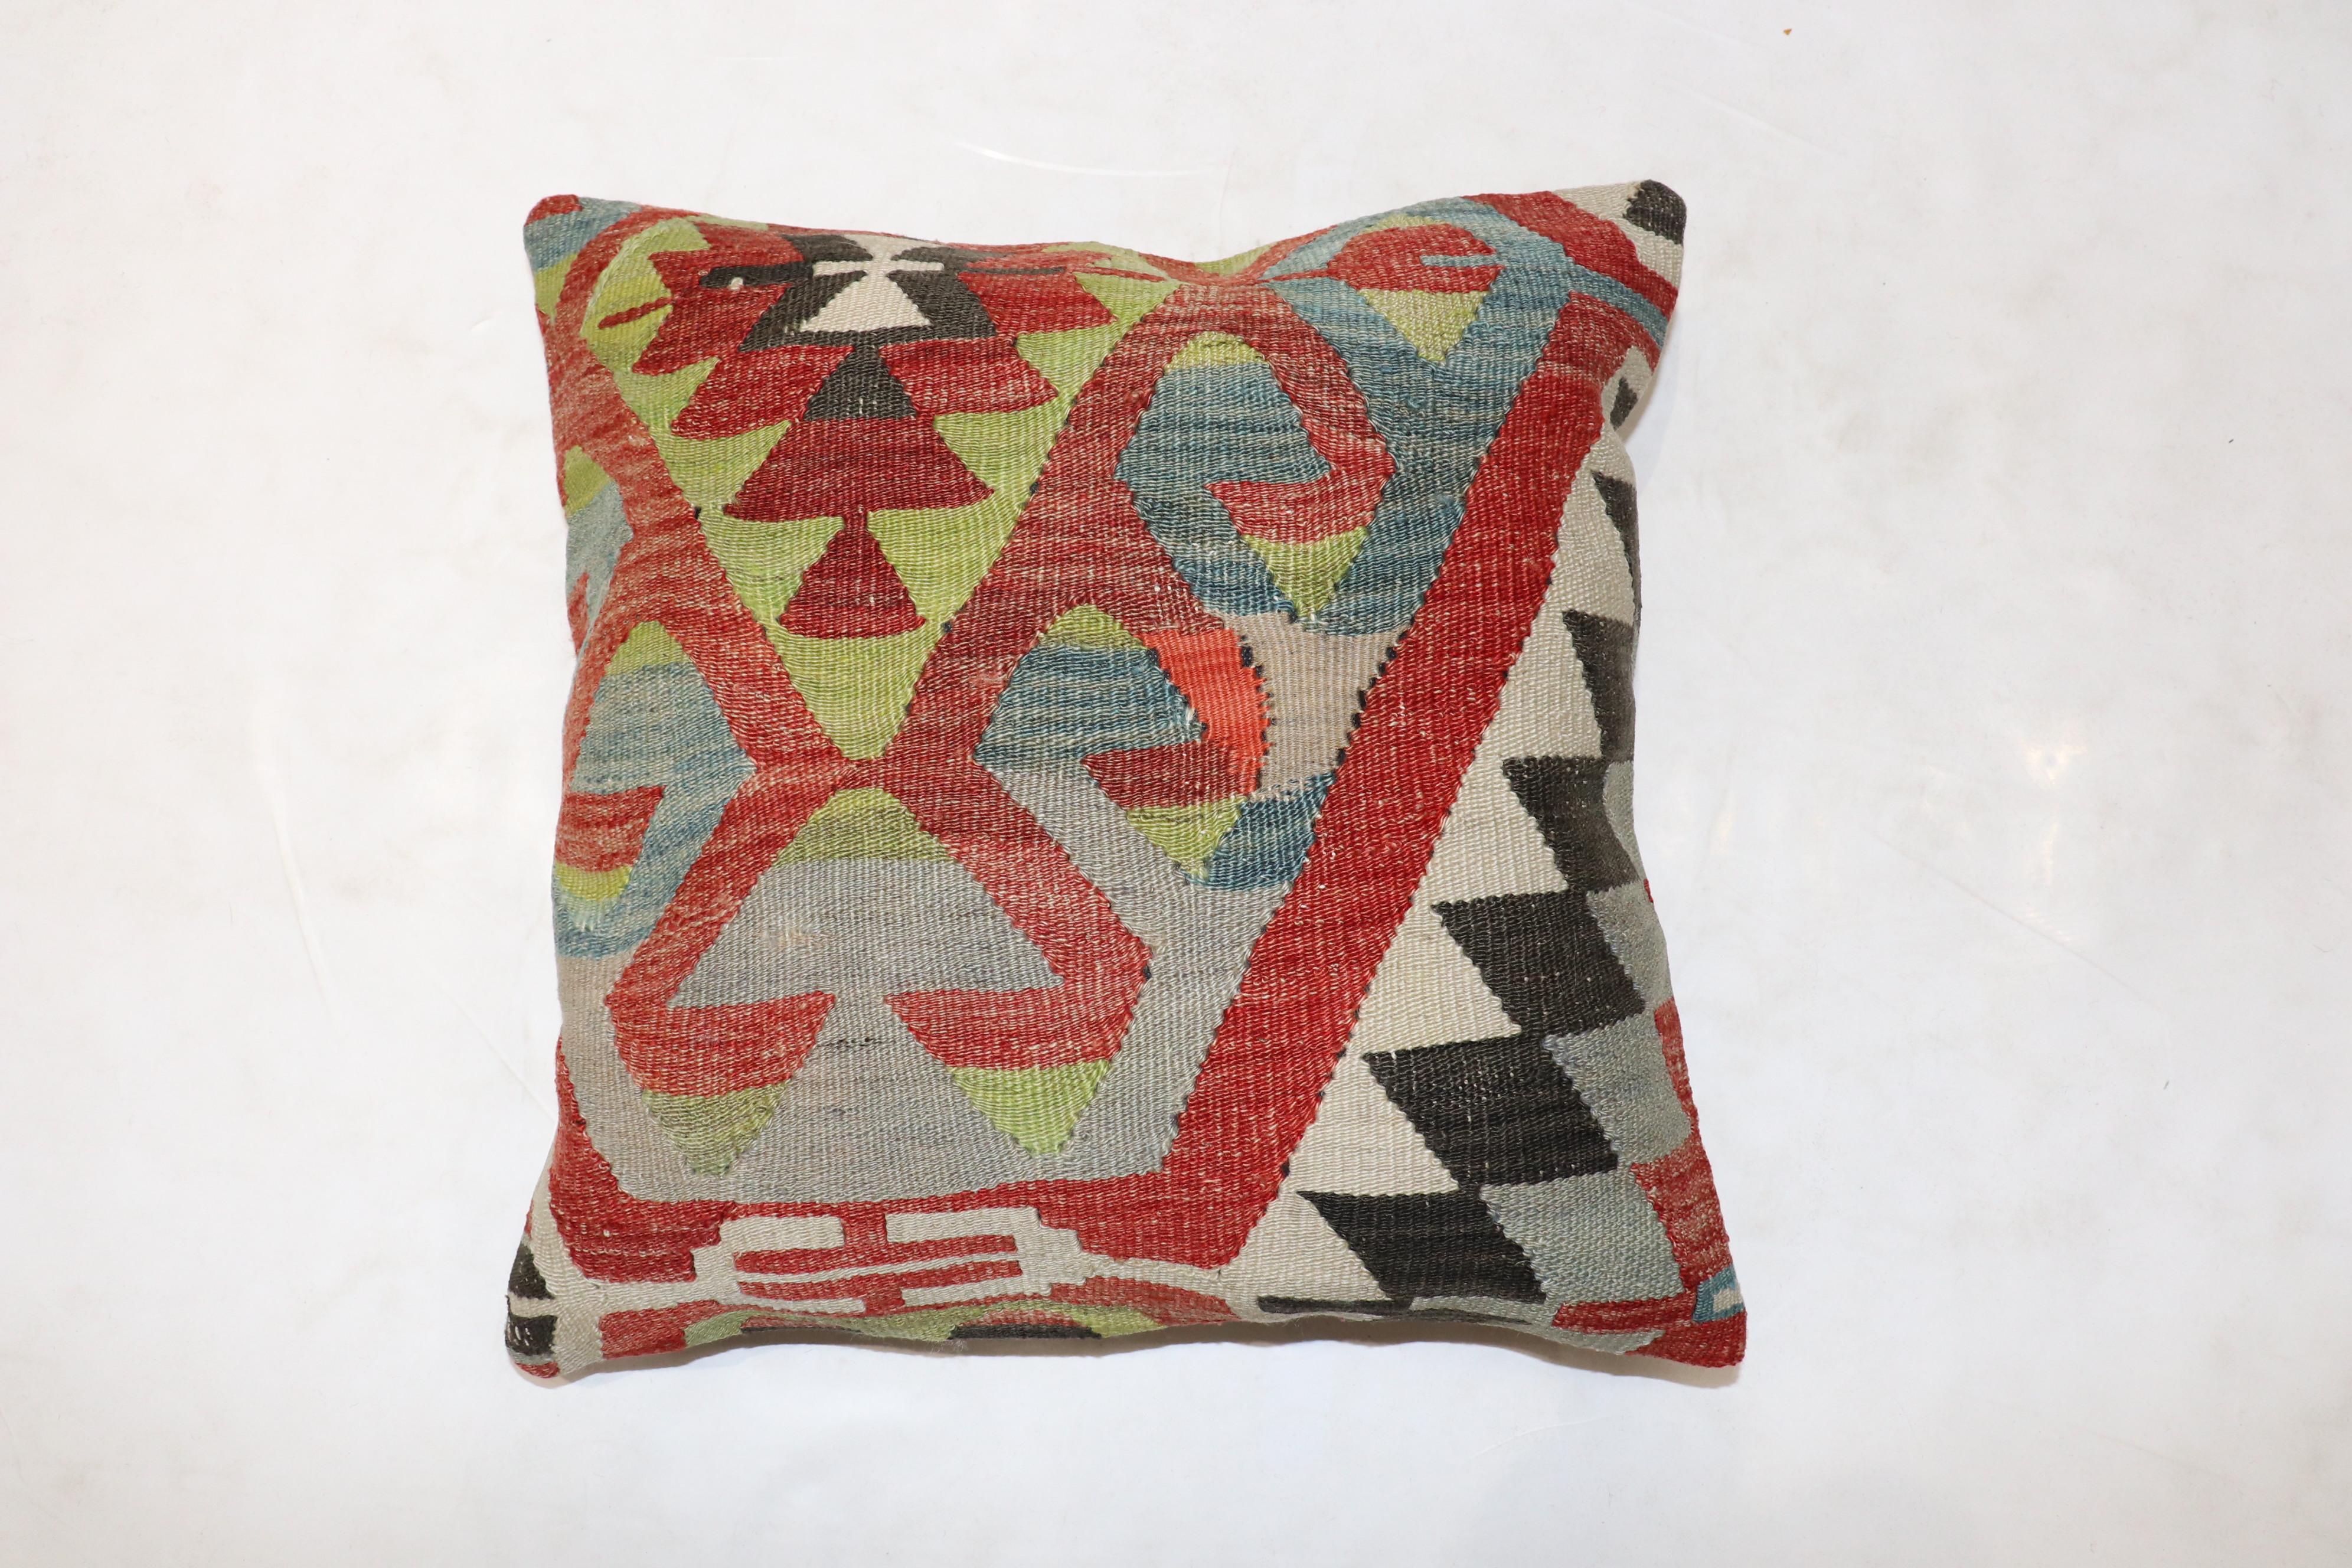 Pillow made from an antique Turkish Kilim flat-weave.

Measures: 19” x 20”.